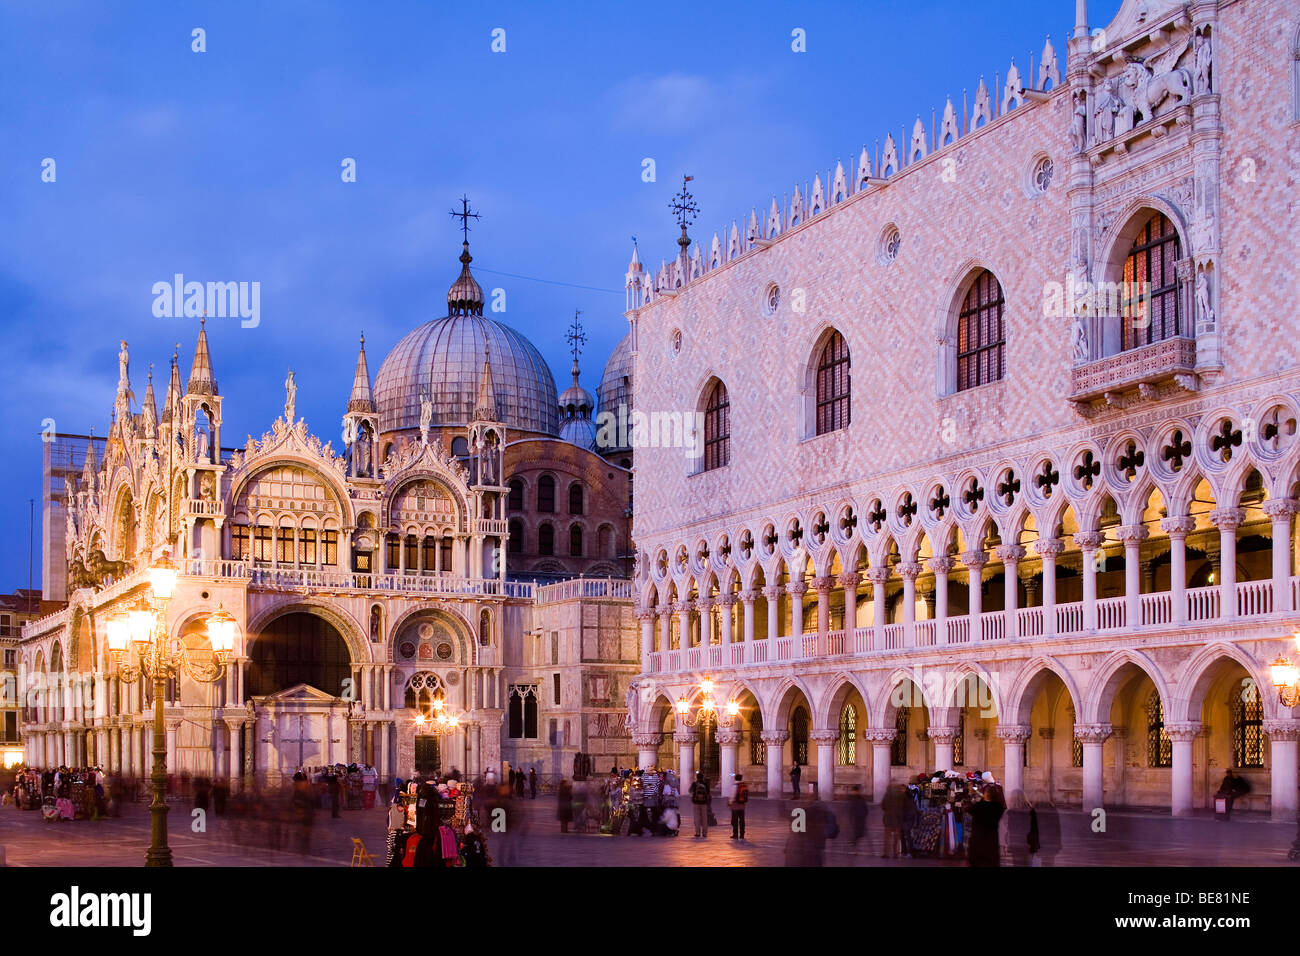 St Mark's Square, Piazza San Marco, with Basilica San Marco and Doges Palace, Palazzo Ducale, Venice, Italy, Europe Stock Photo